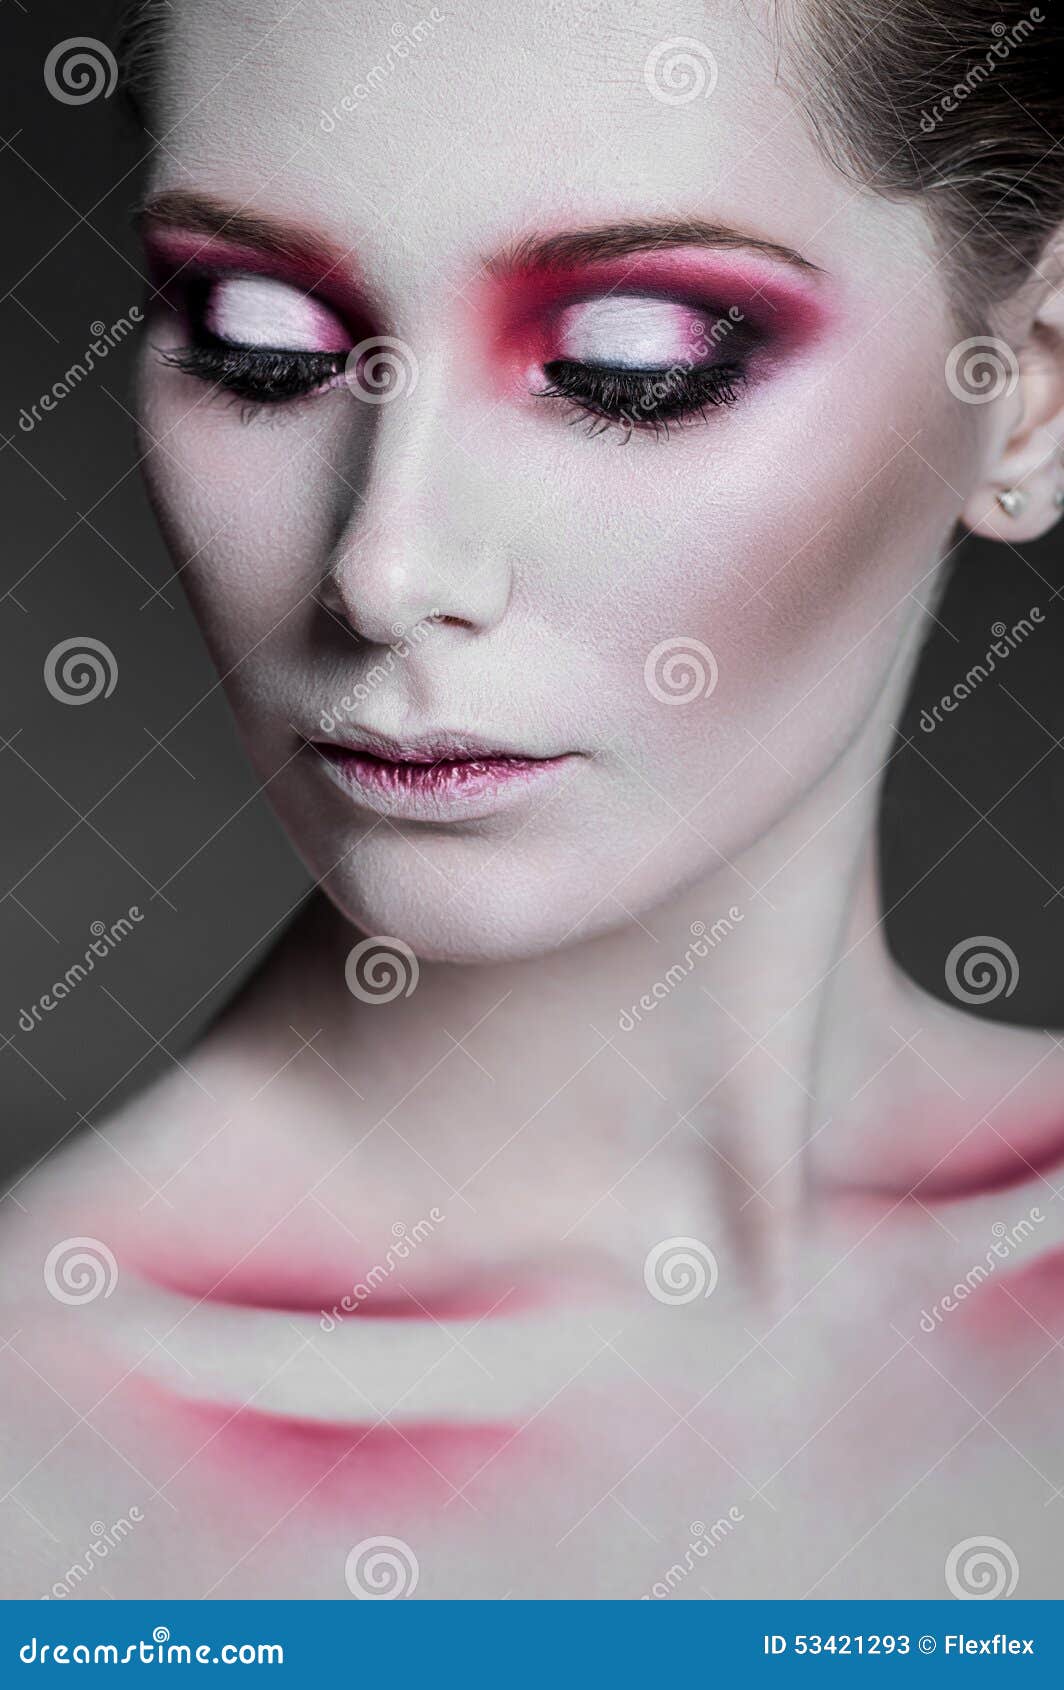 Portrait of Beautiful Woman with Pink Make-up Stock Image - Image of ...